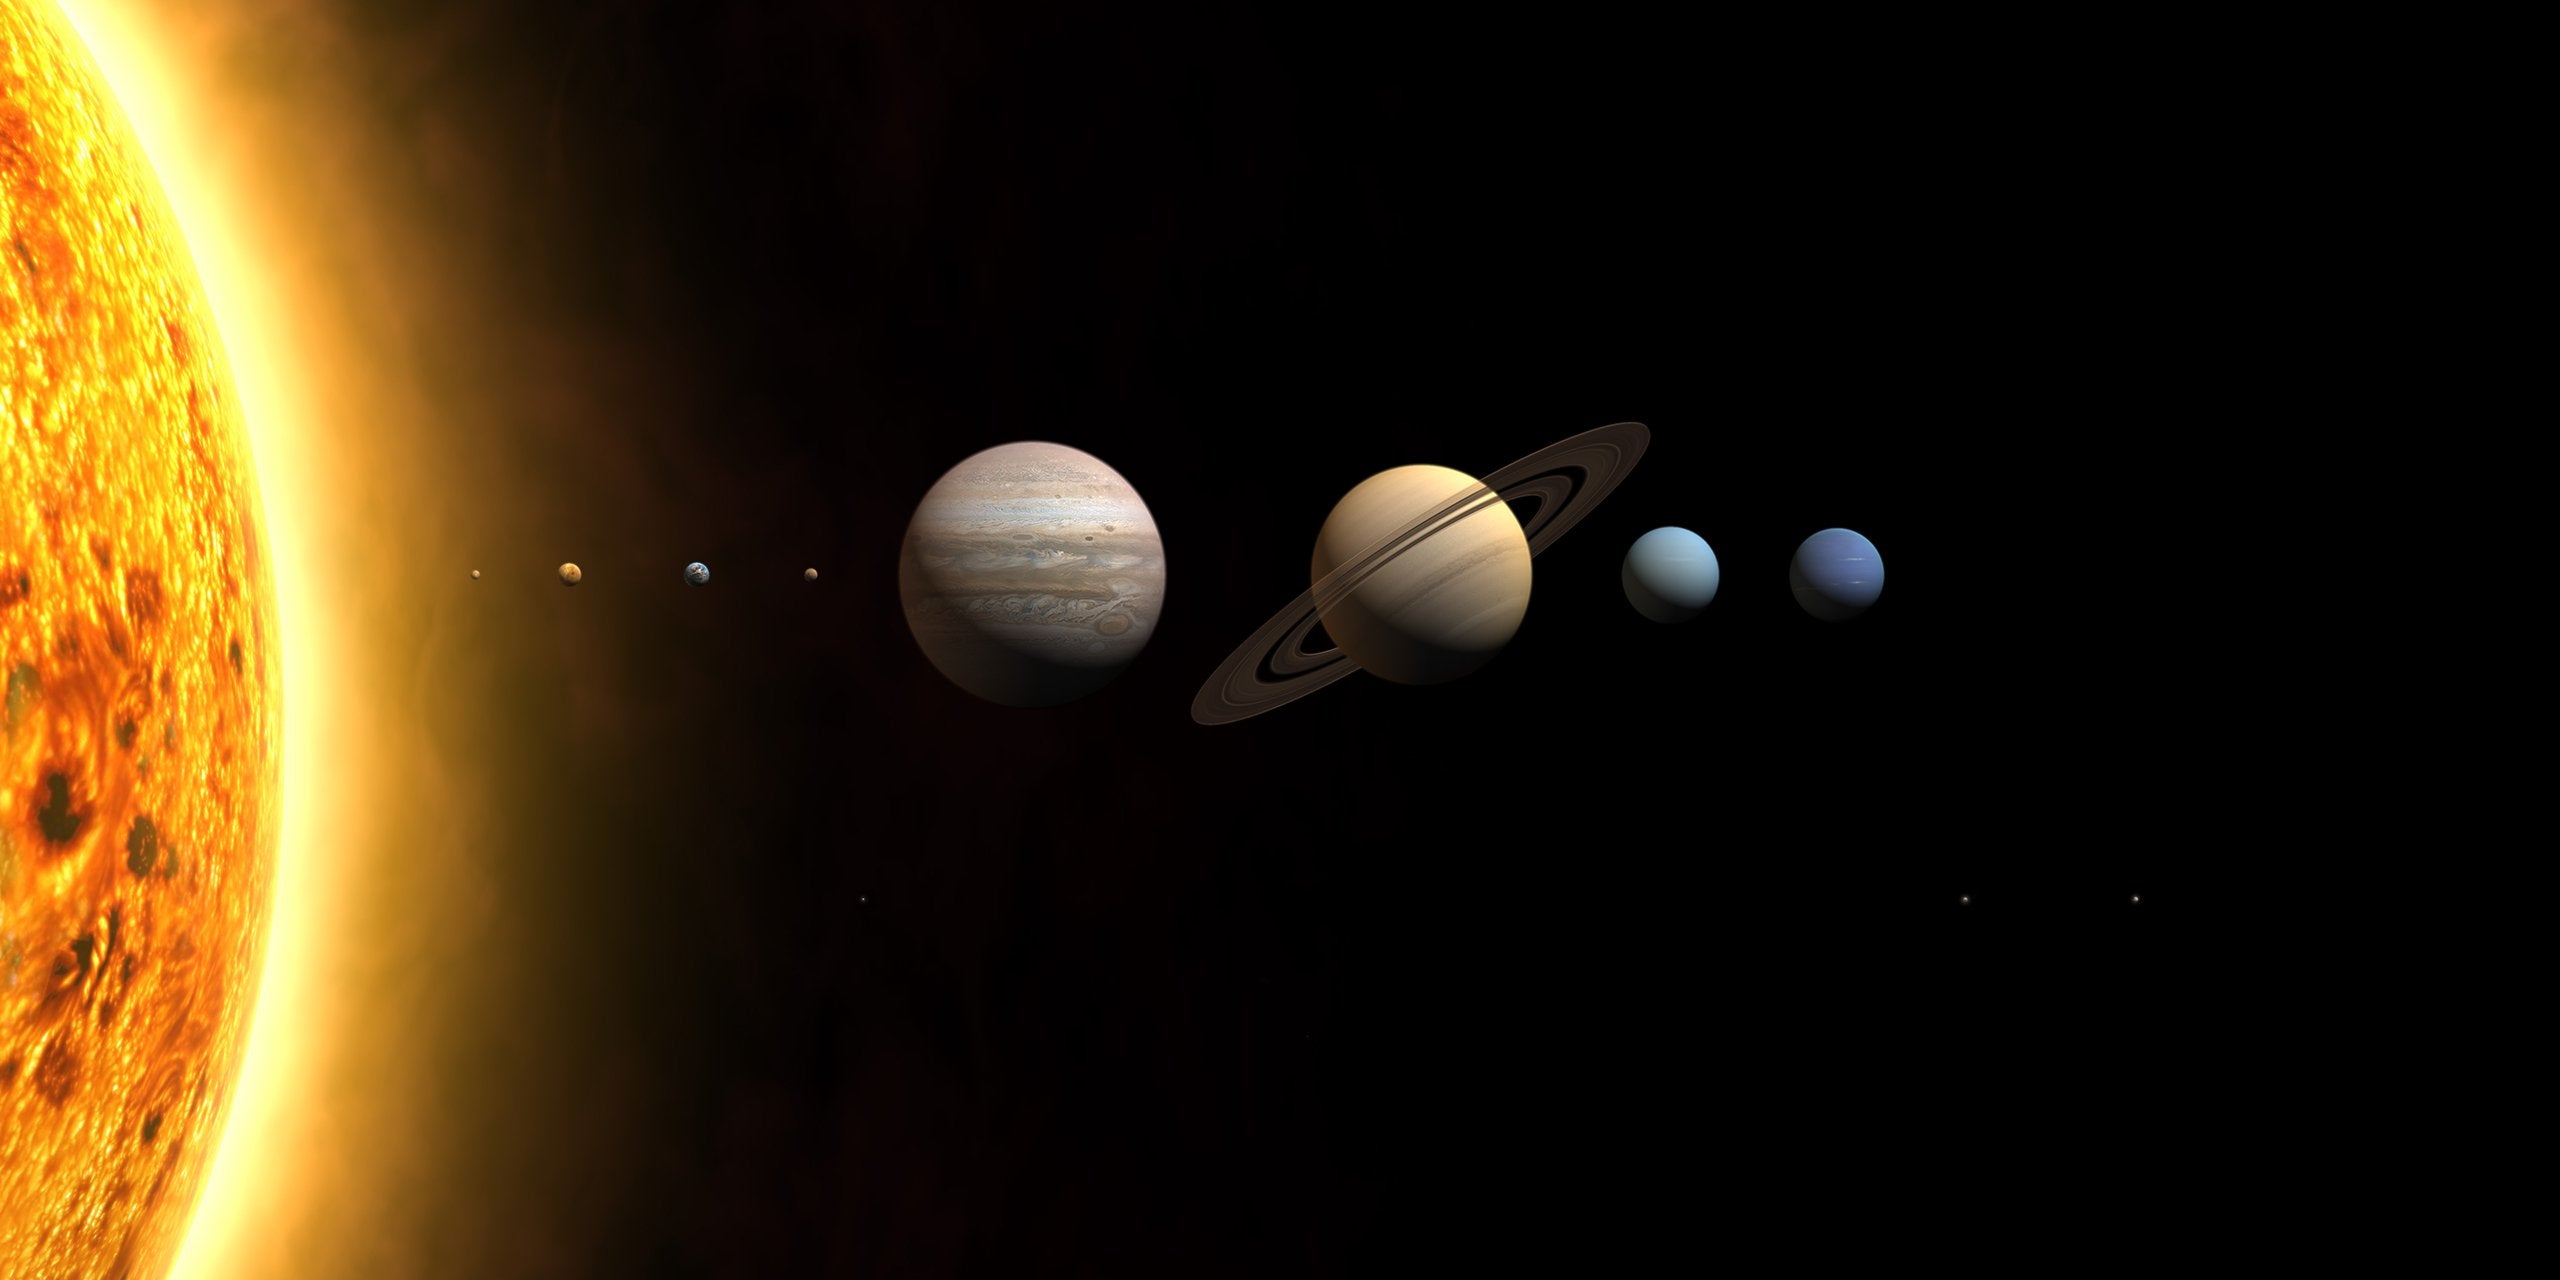 the planets and its moons